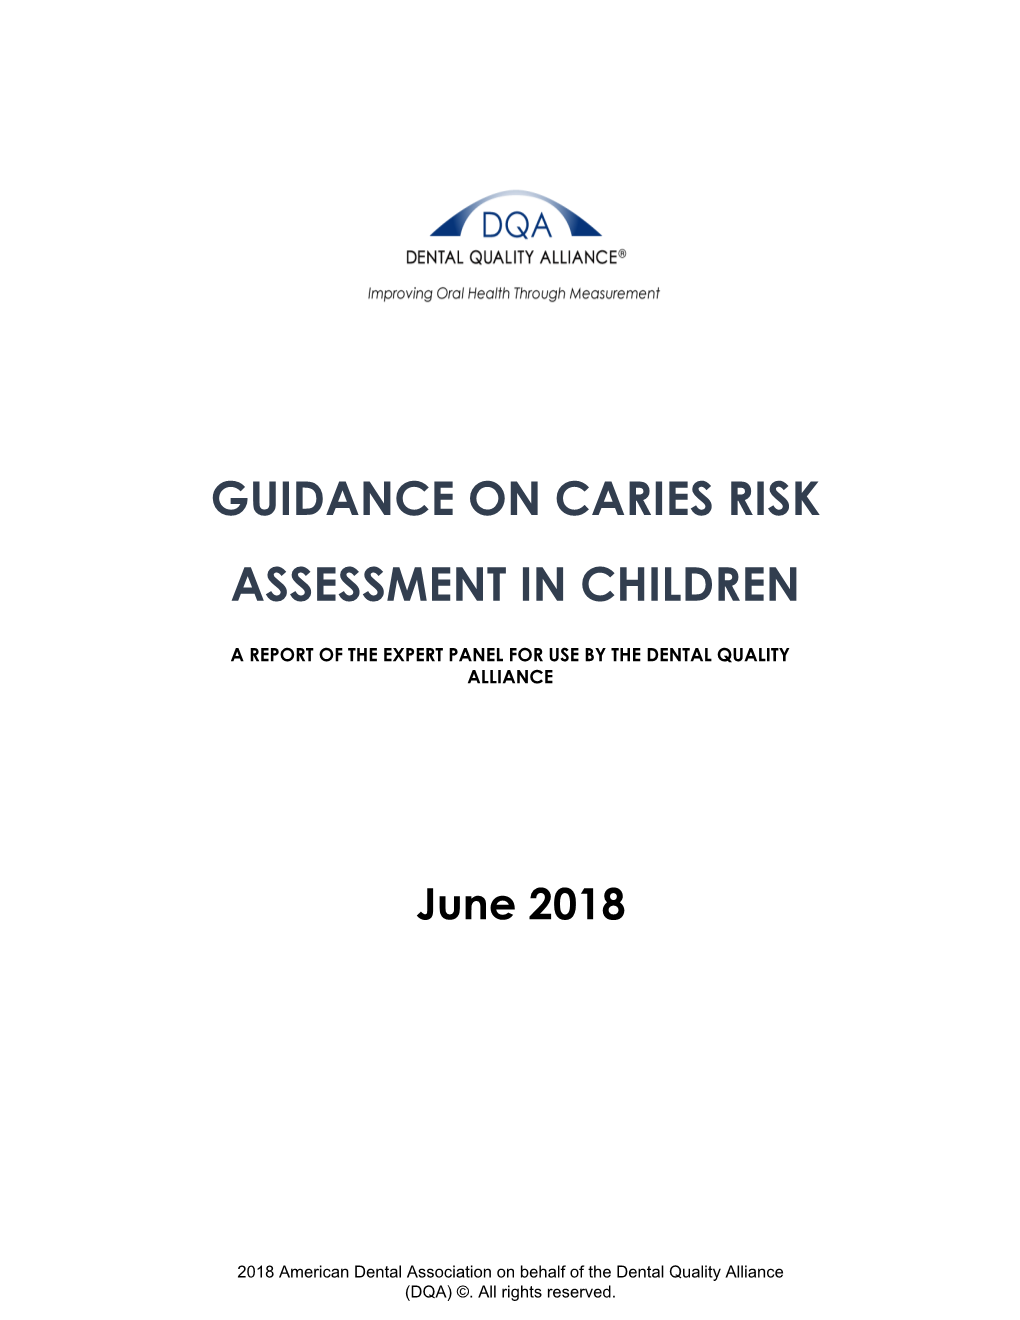 Guidance on Caries Risk Assessment in Children: a Report of the Expert